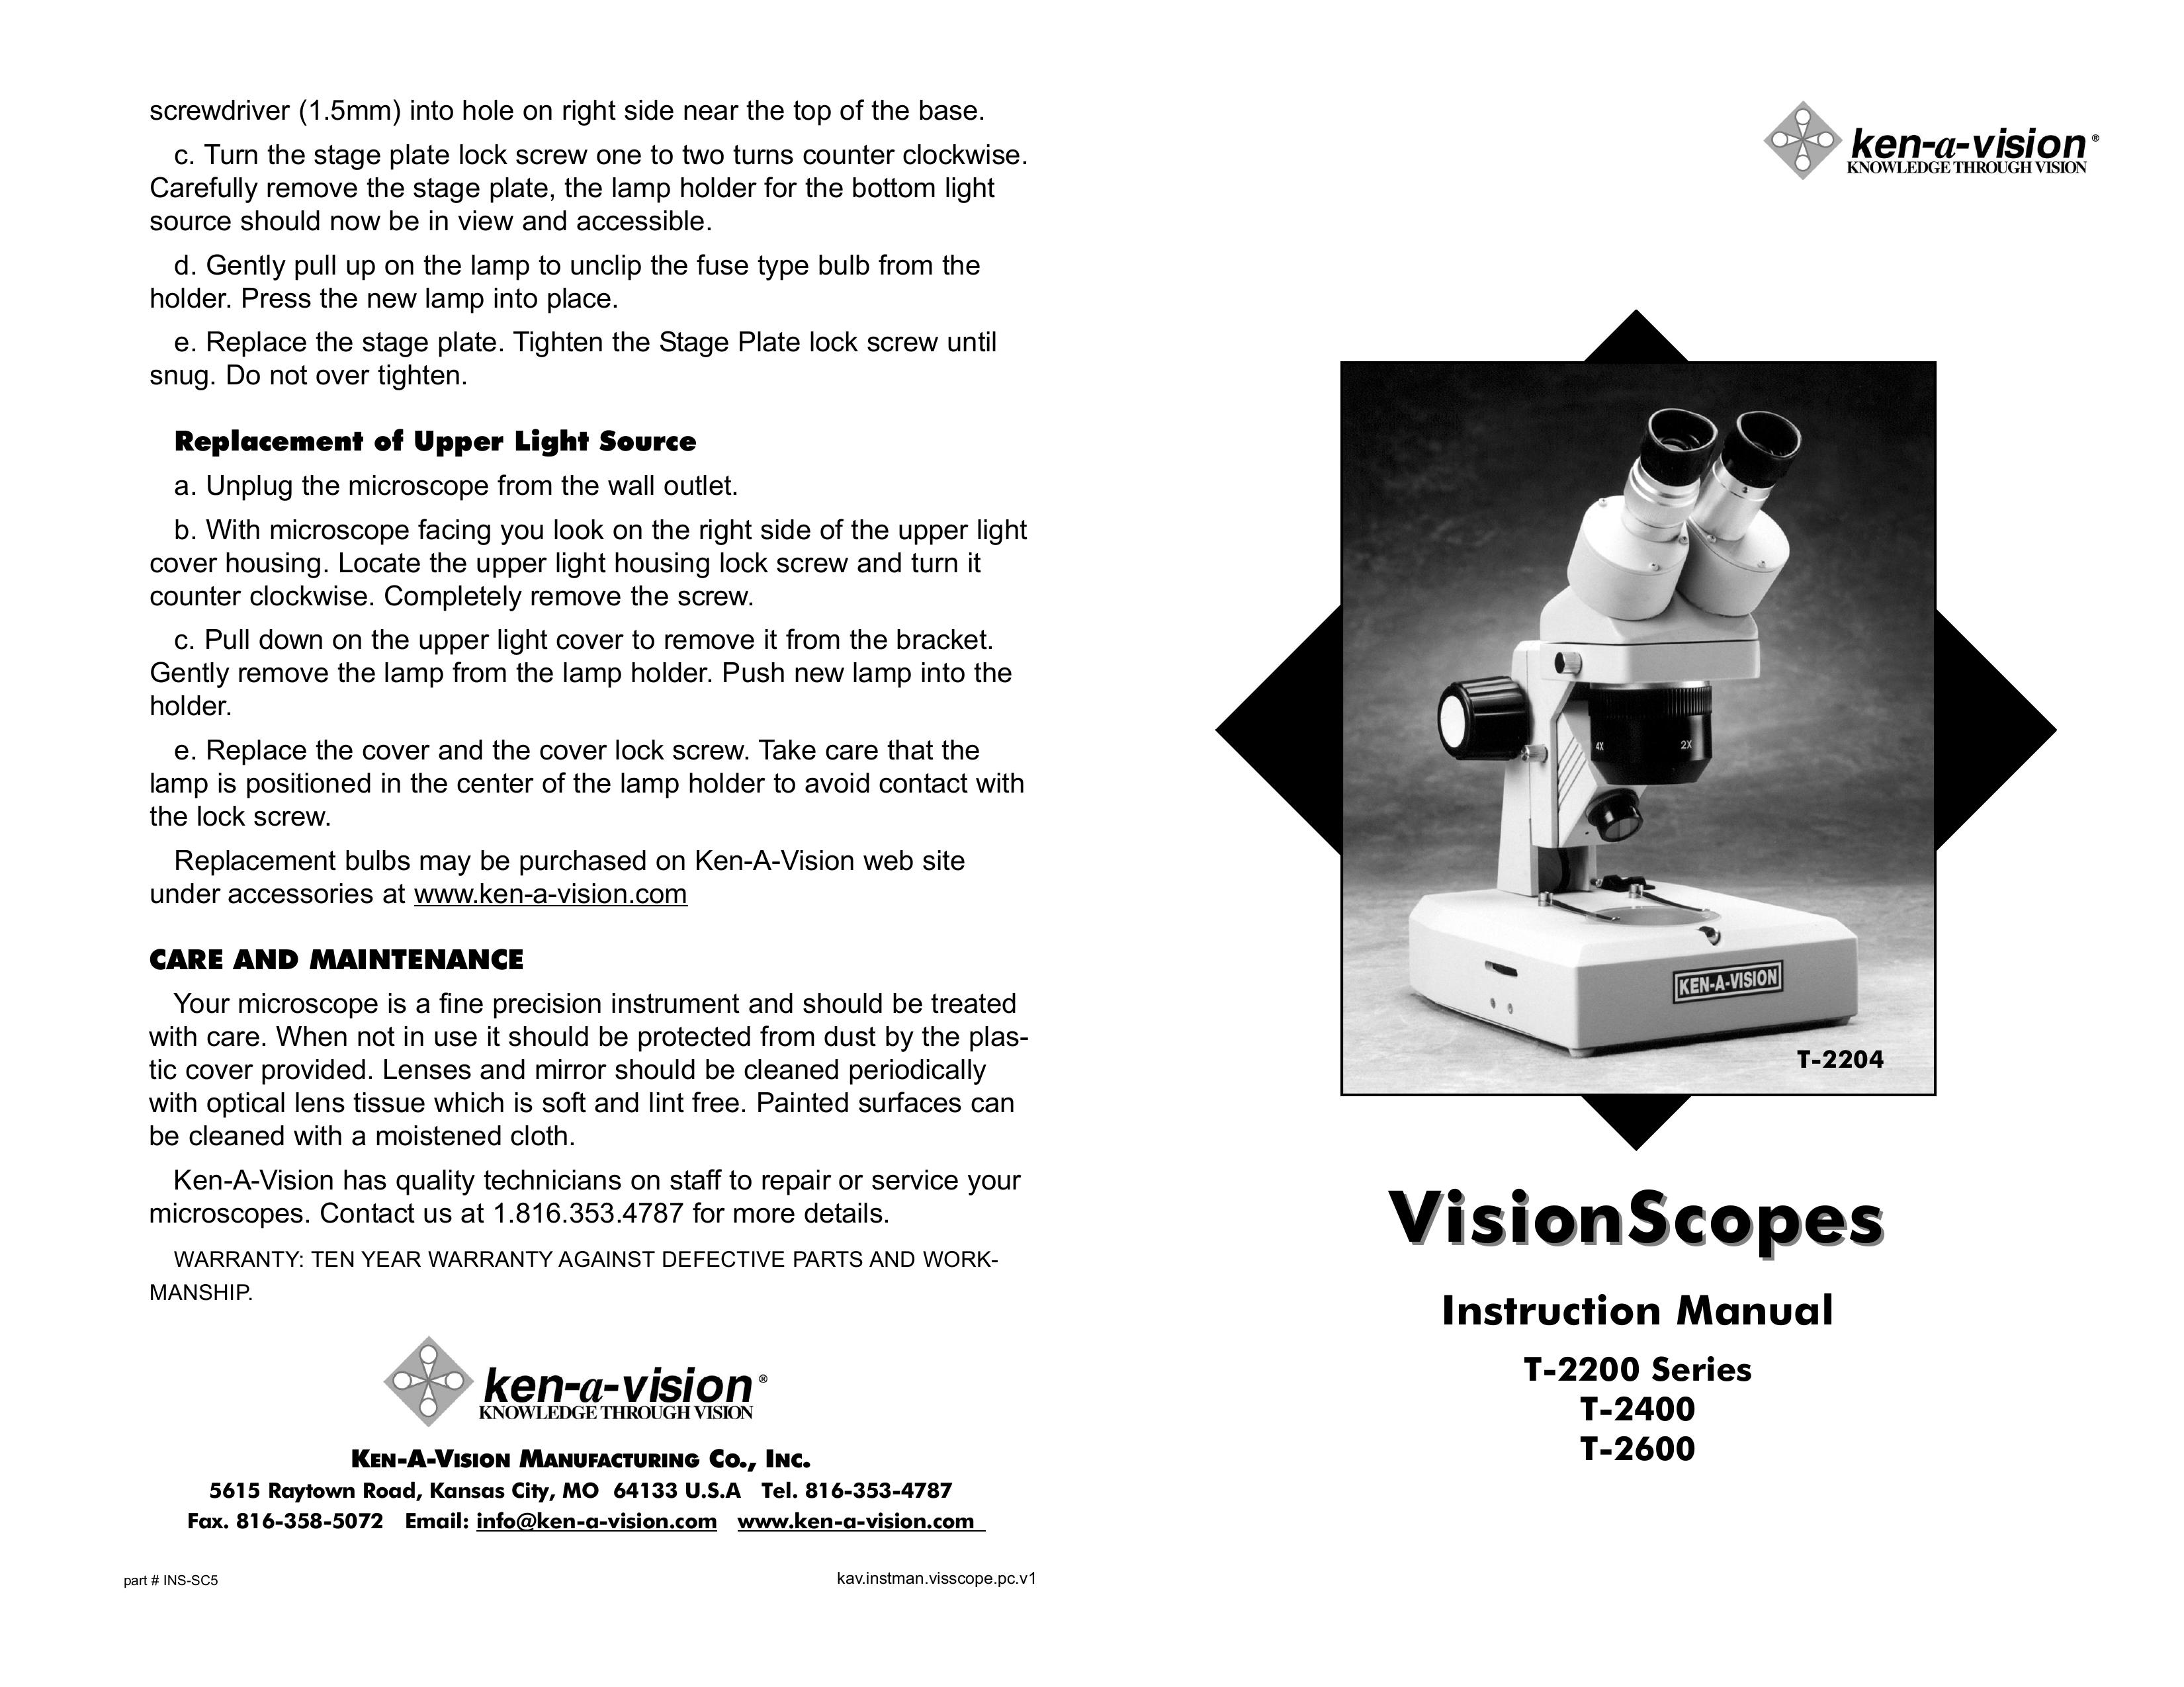 Ken-A-Vision T-2600 Microscope & Magnifier User Manual